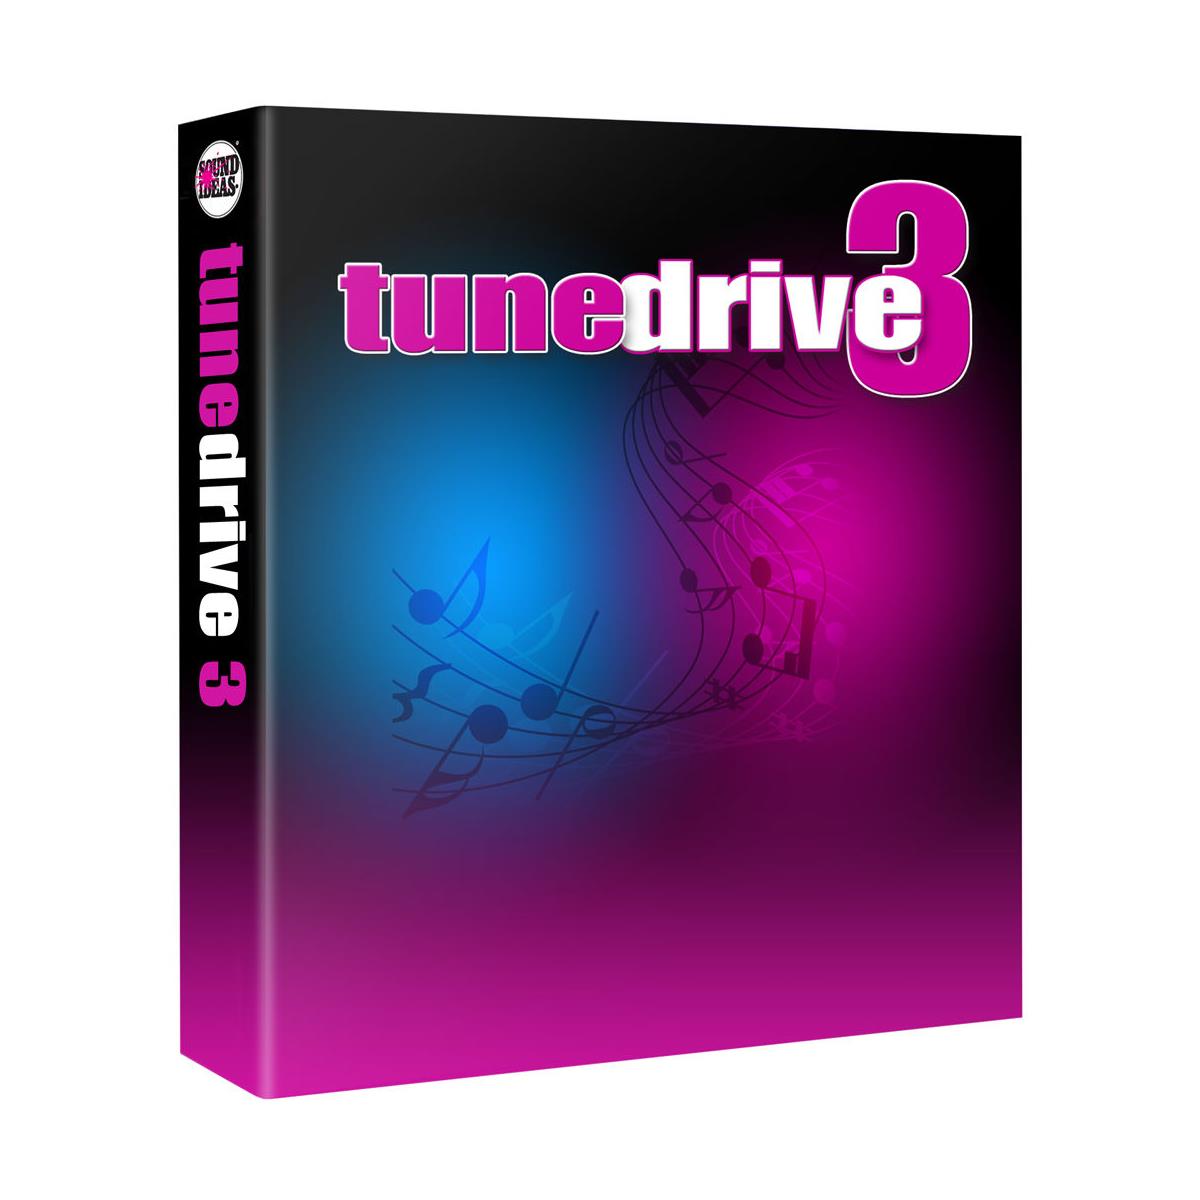 Image of Sound Ideas Tune Drive 3 Software on Hard Drive